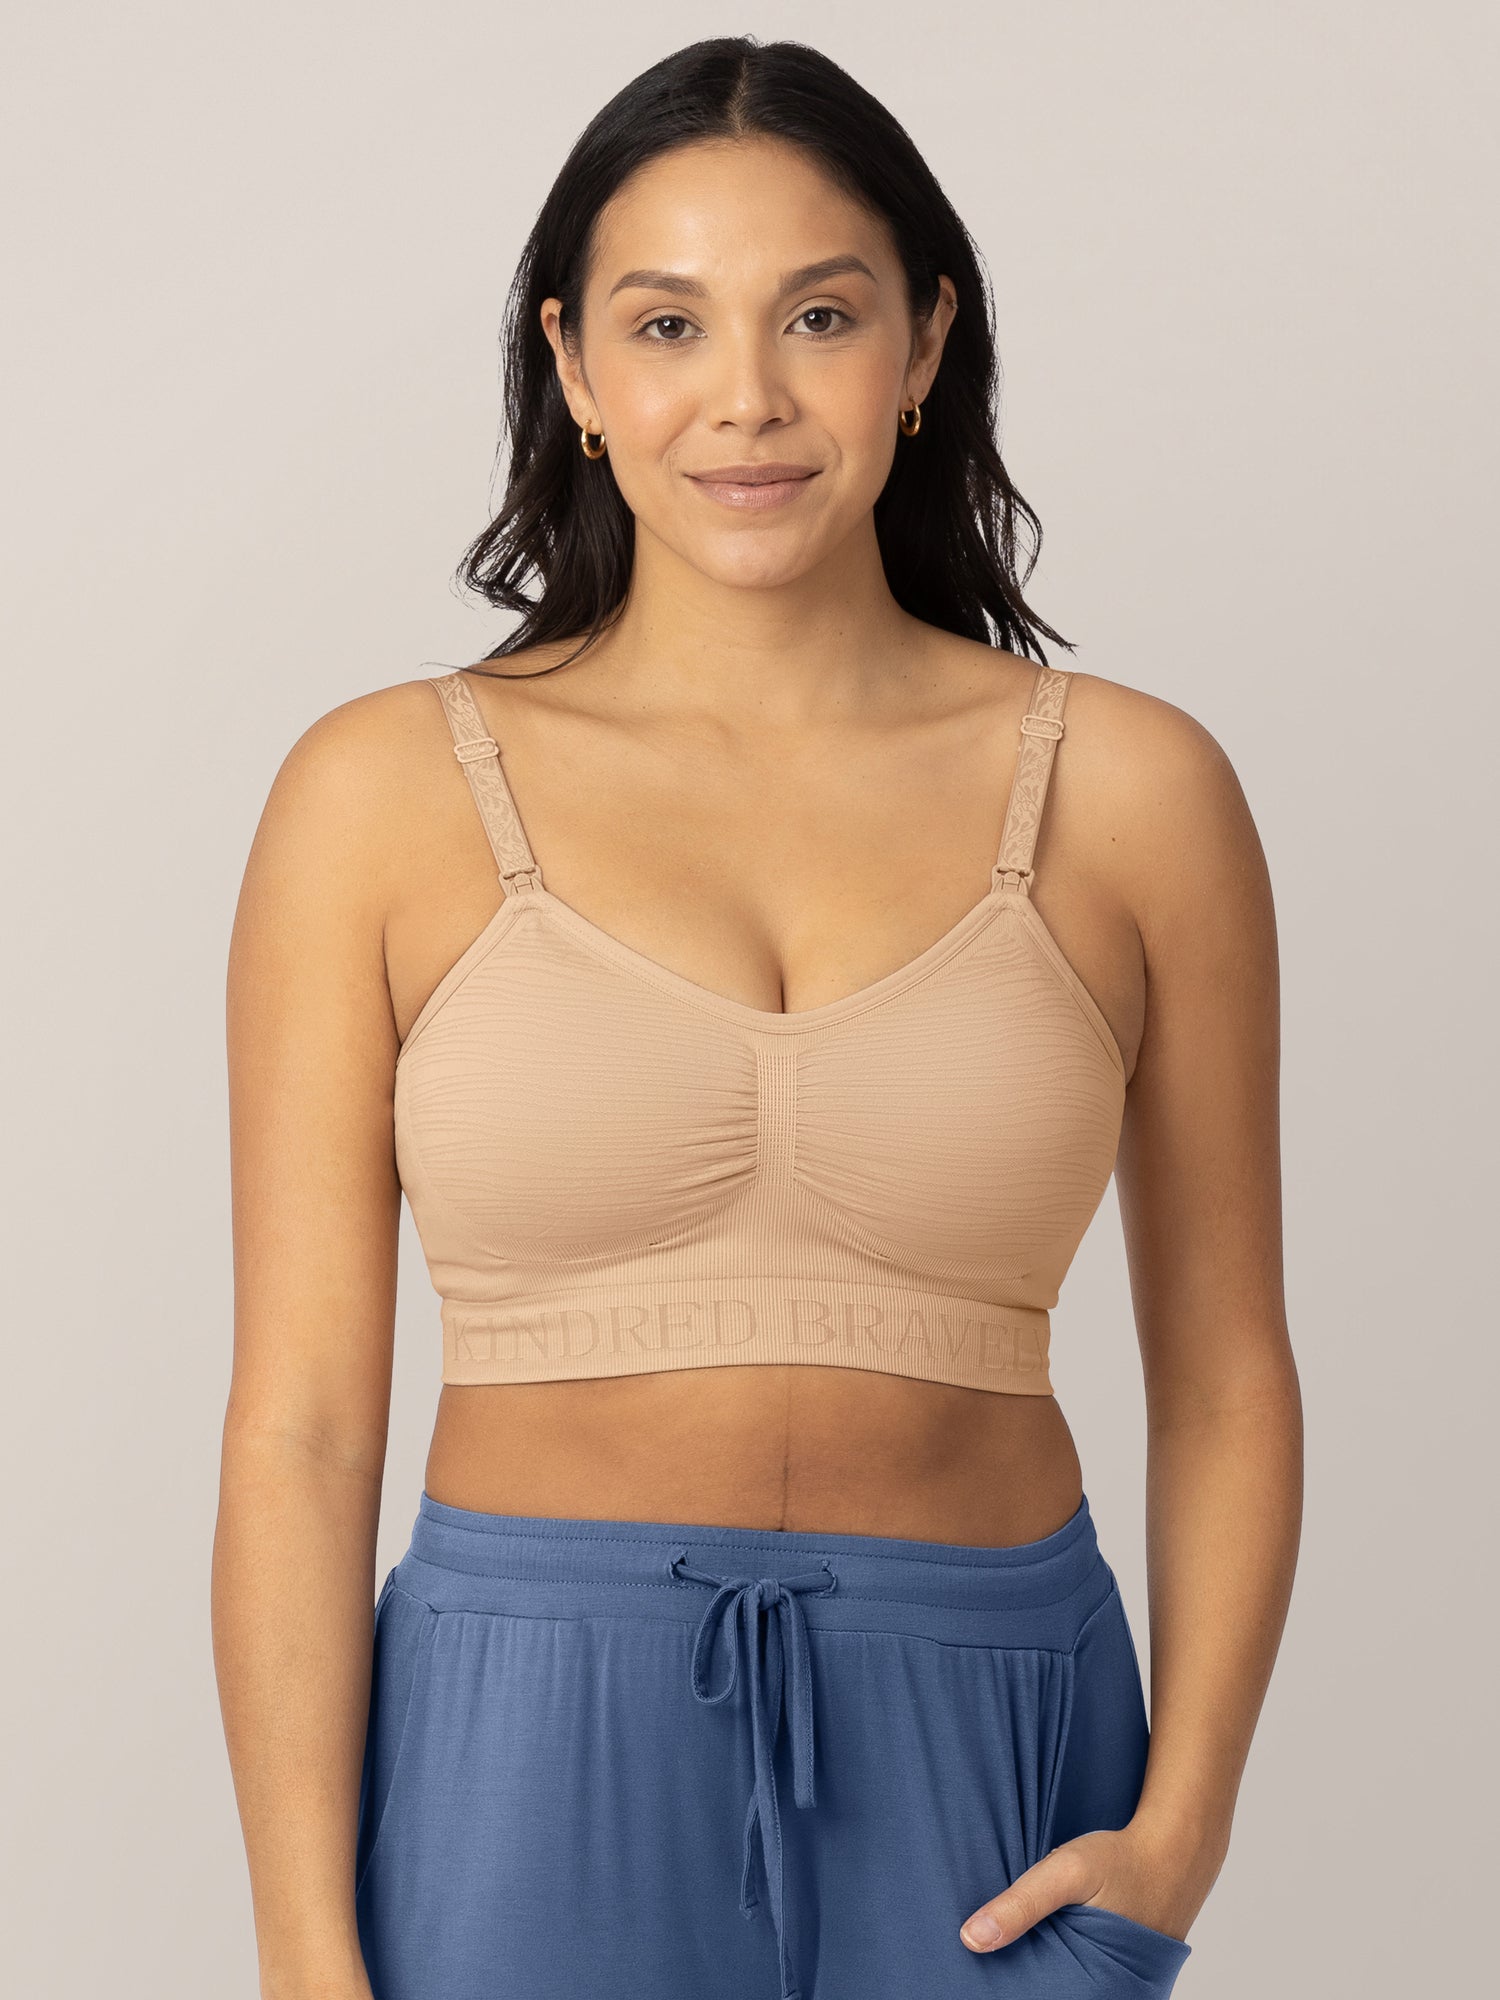 Kindred By Kindred Bravely Women's Pumping + Nursing Hands Free Bra - Soft  Pink Xxl : Target